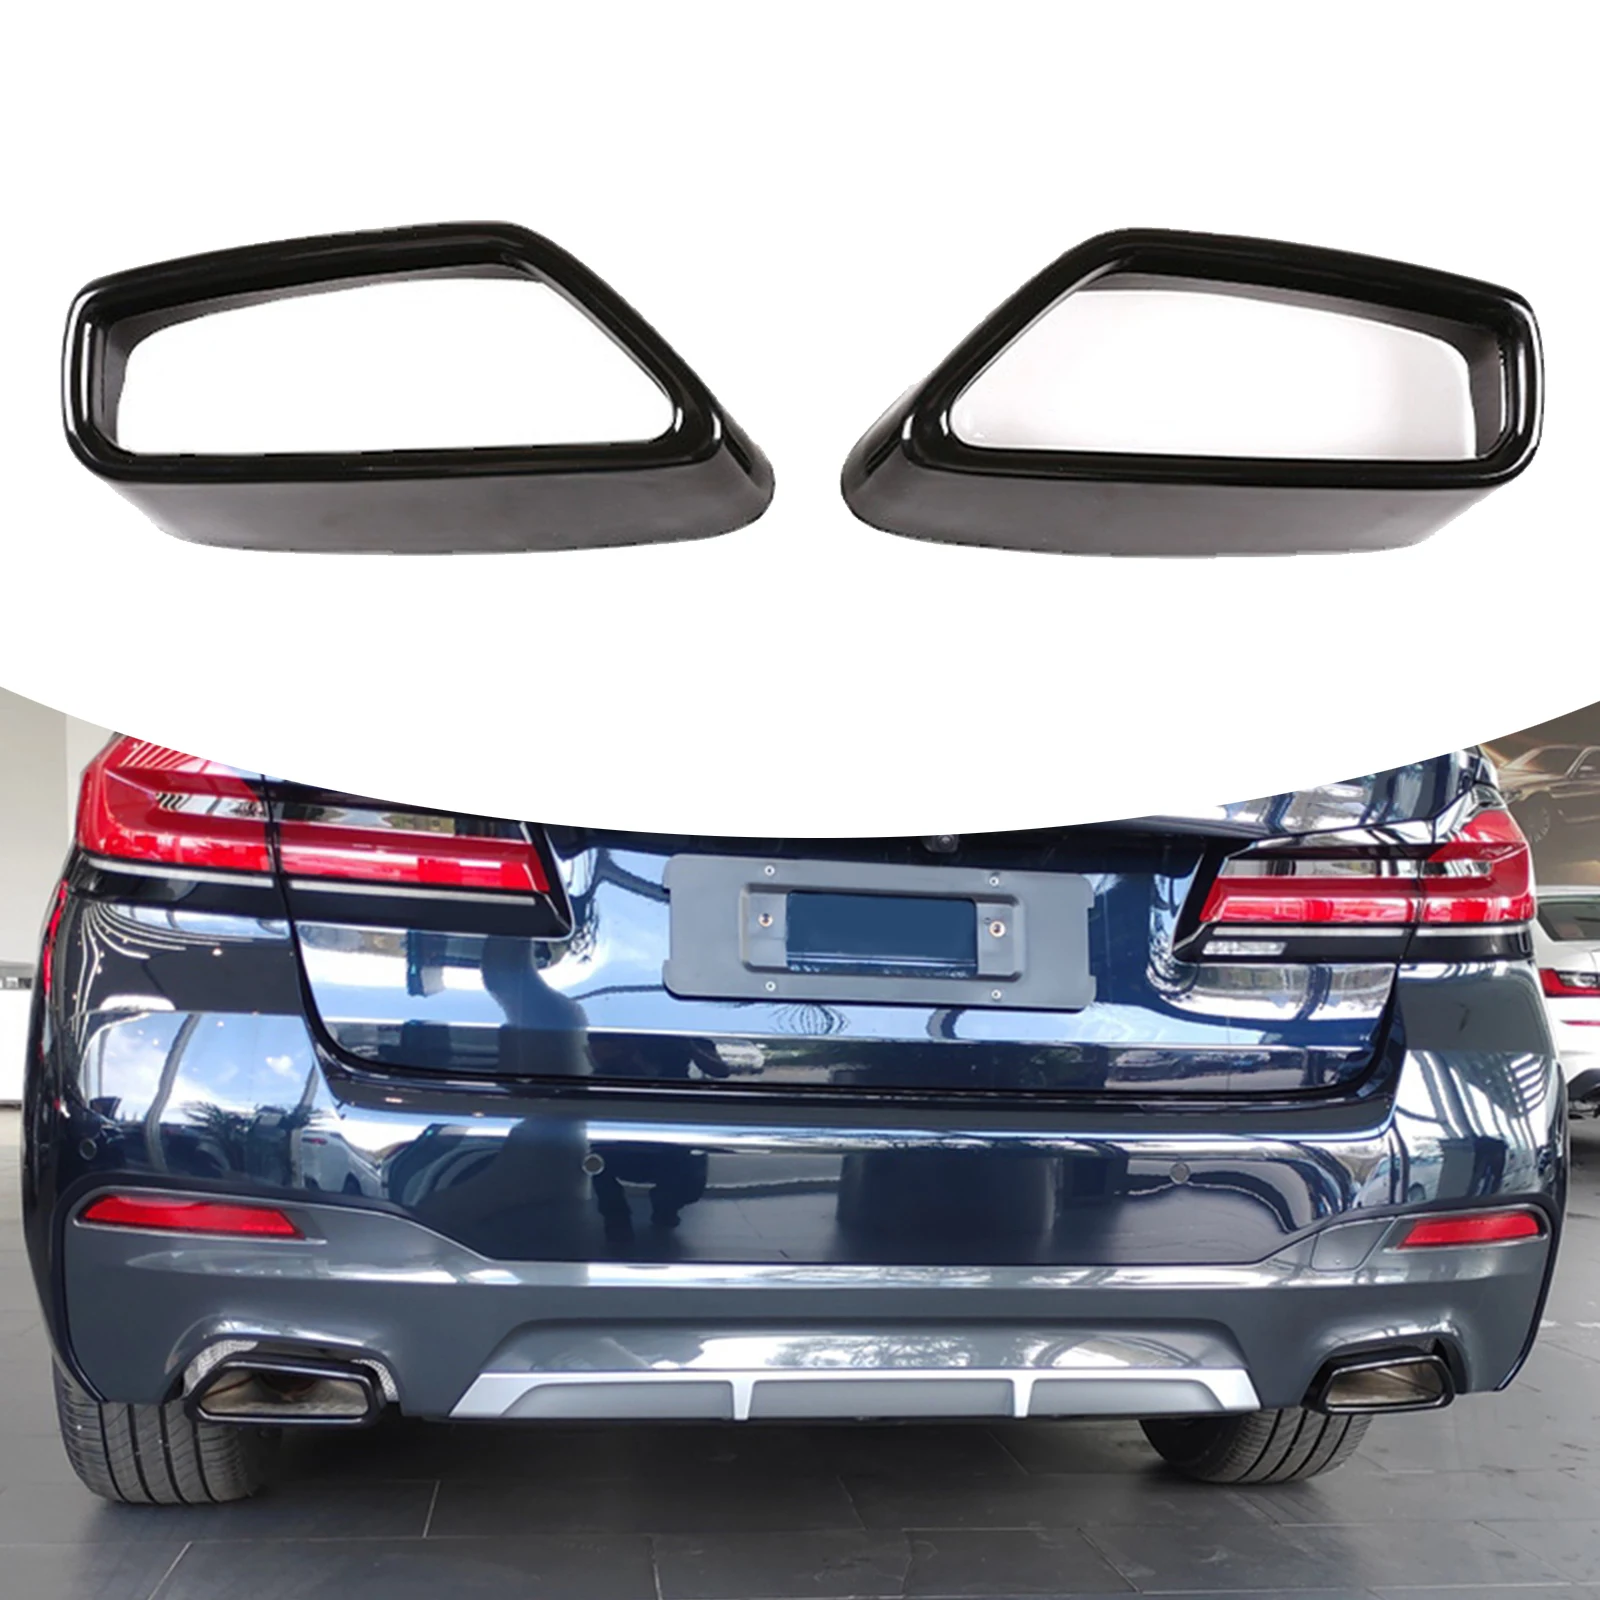 2Pcs Car Rear Exhaust Muffler Pipe Cover Trim fits for BMW 5 G30 G38 2018-2021, Professional